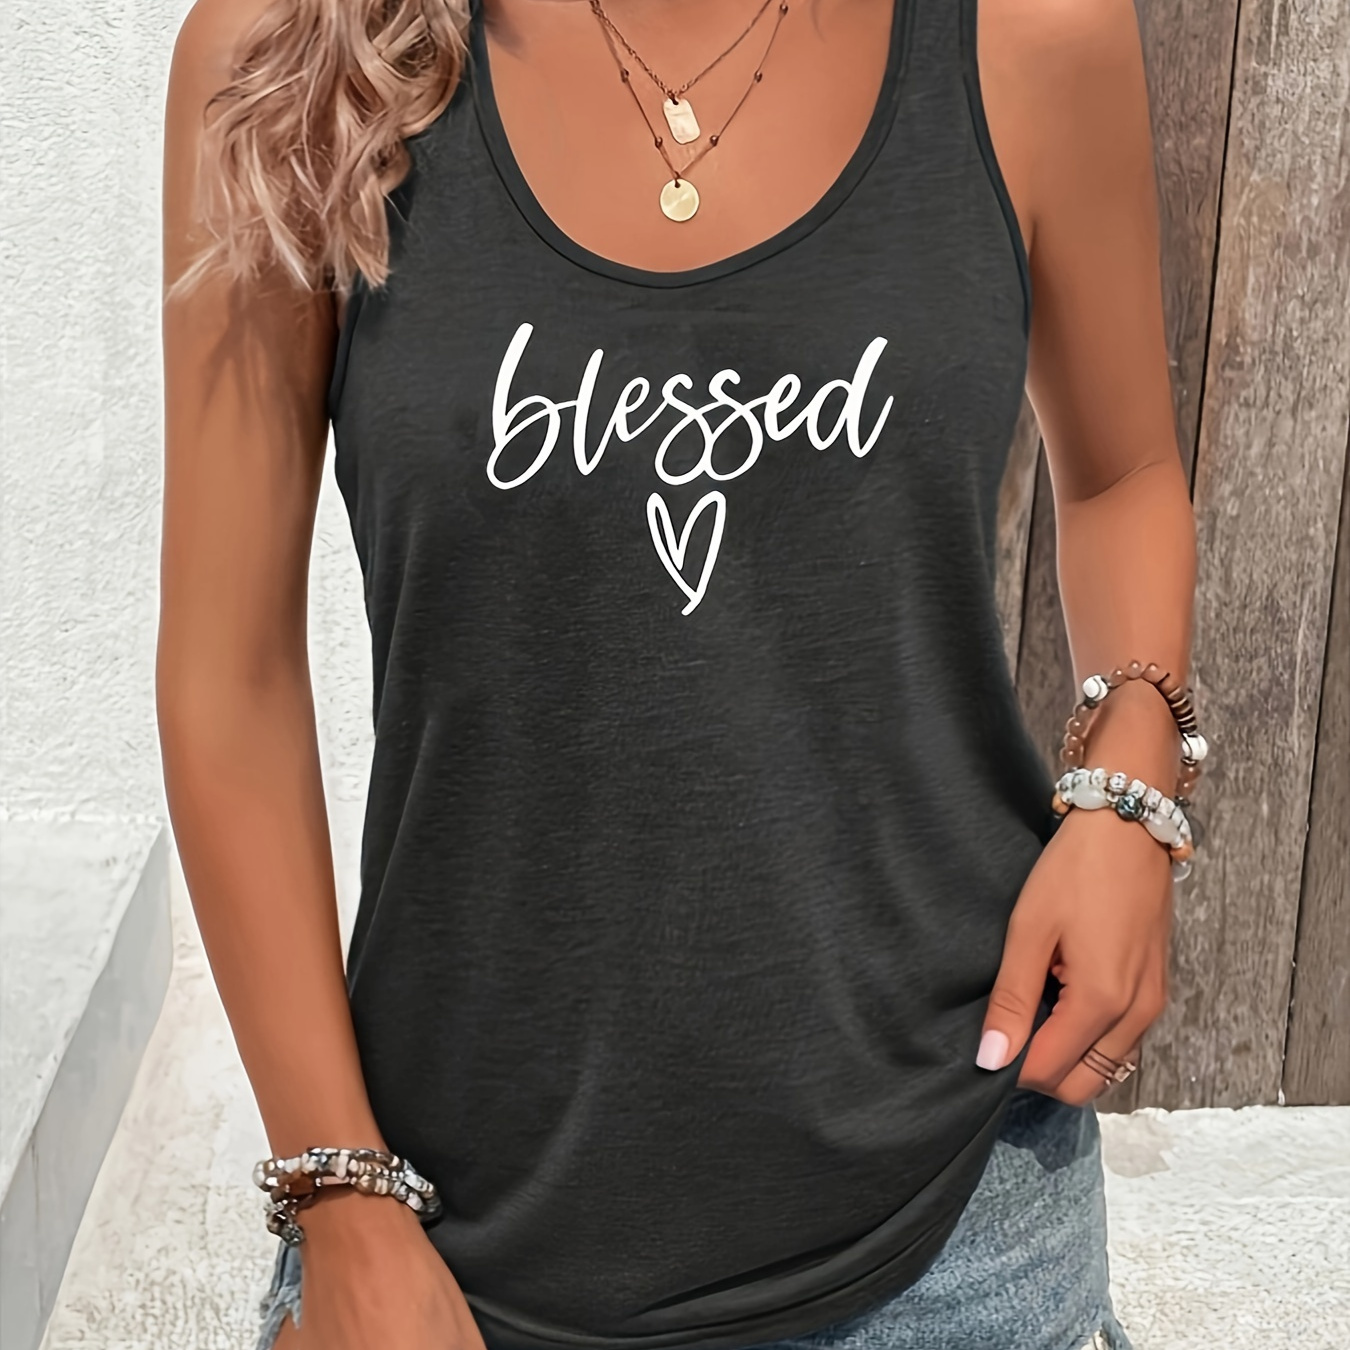 

Blessed & Heart Print Tank Top, Casual Sleeveless Tank Top For Summer, Women's Clothing